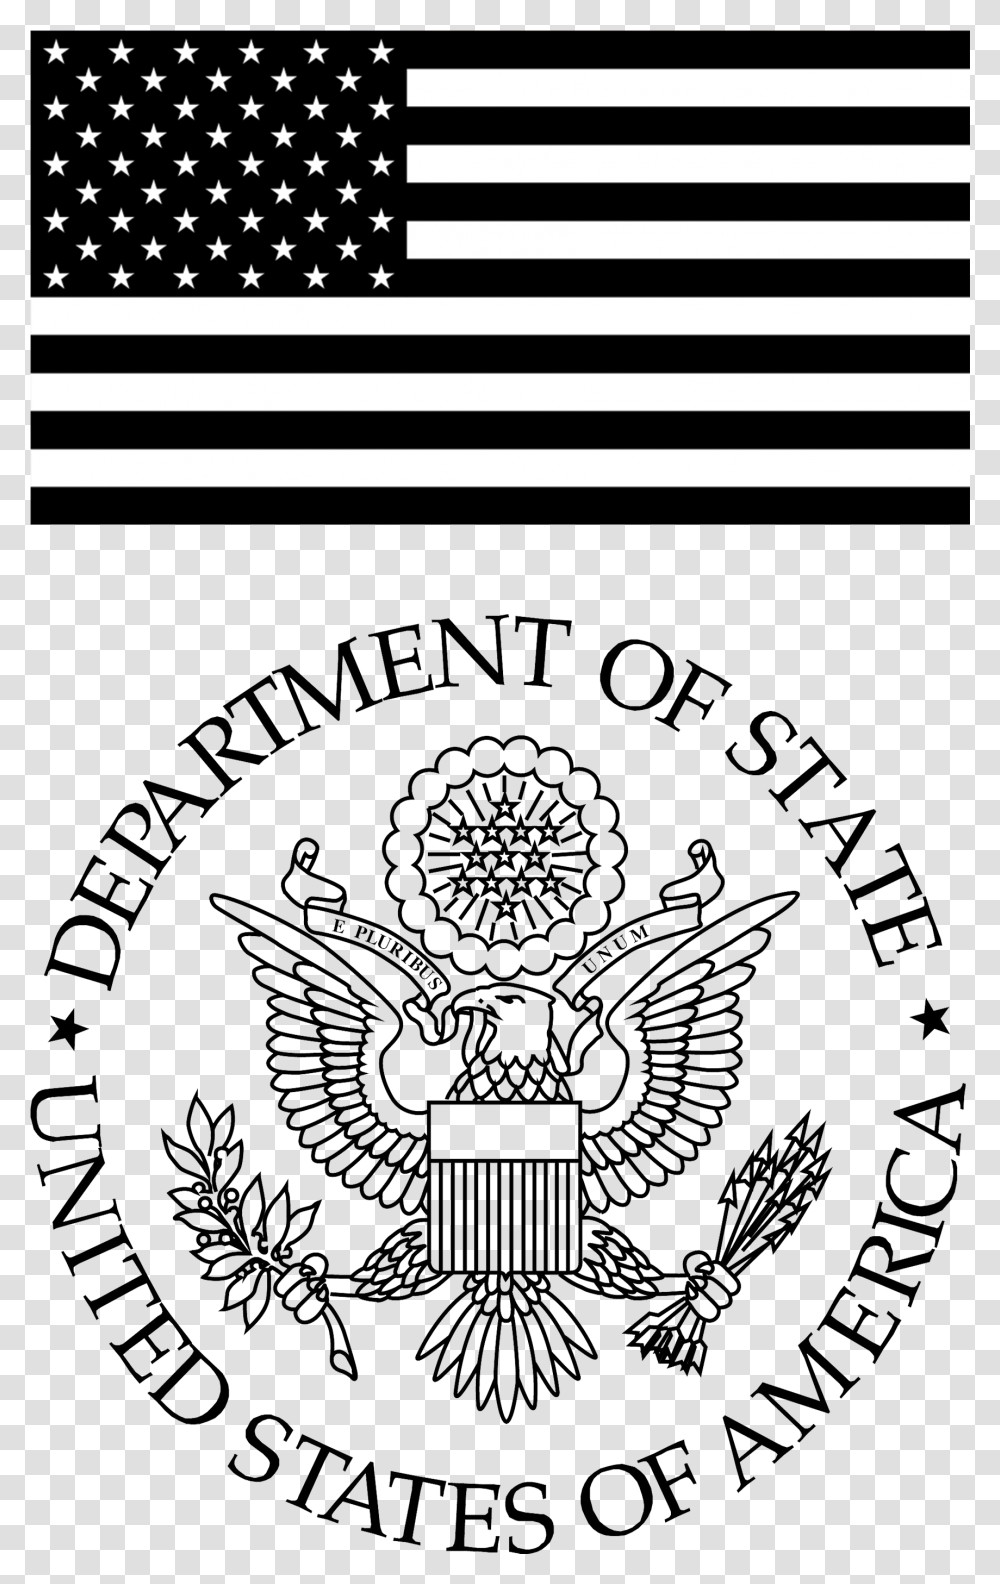 State Seal And Flag Stacked Department Of State Stamp, Logo, Trademark Transparent Png